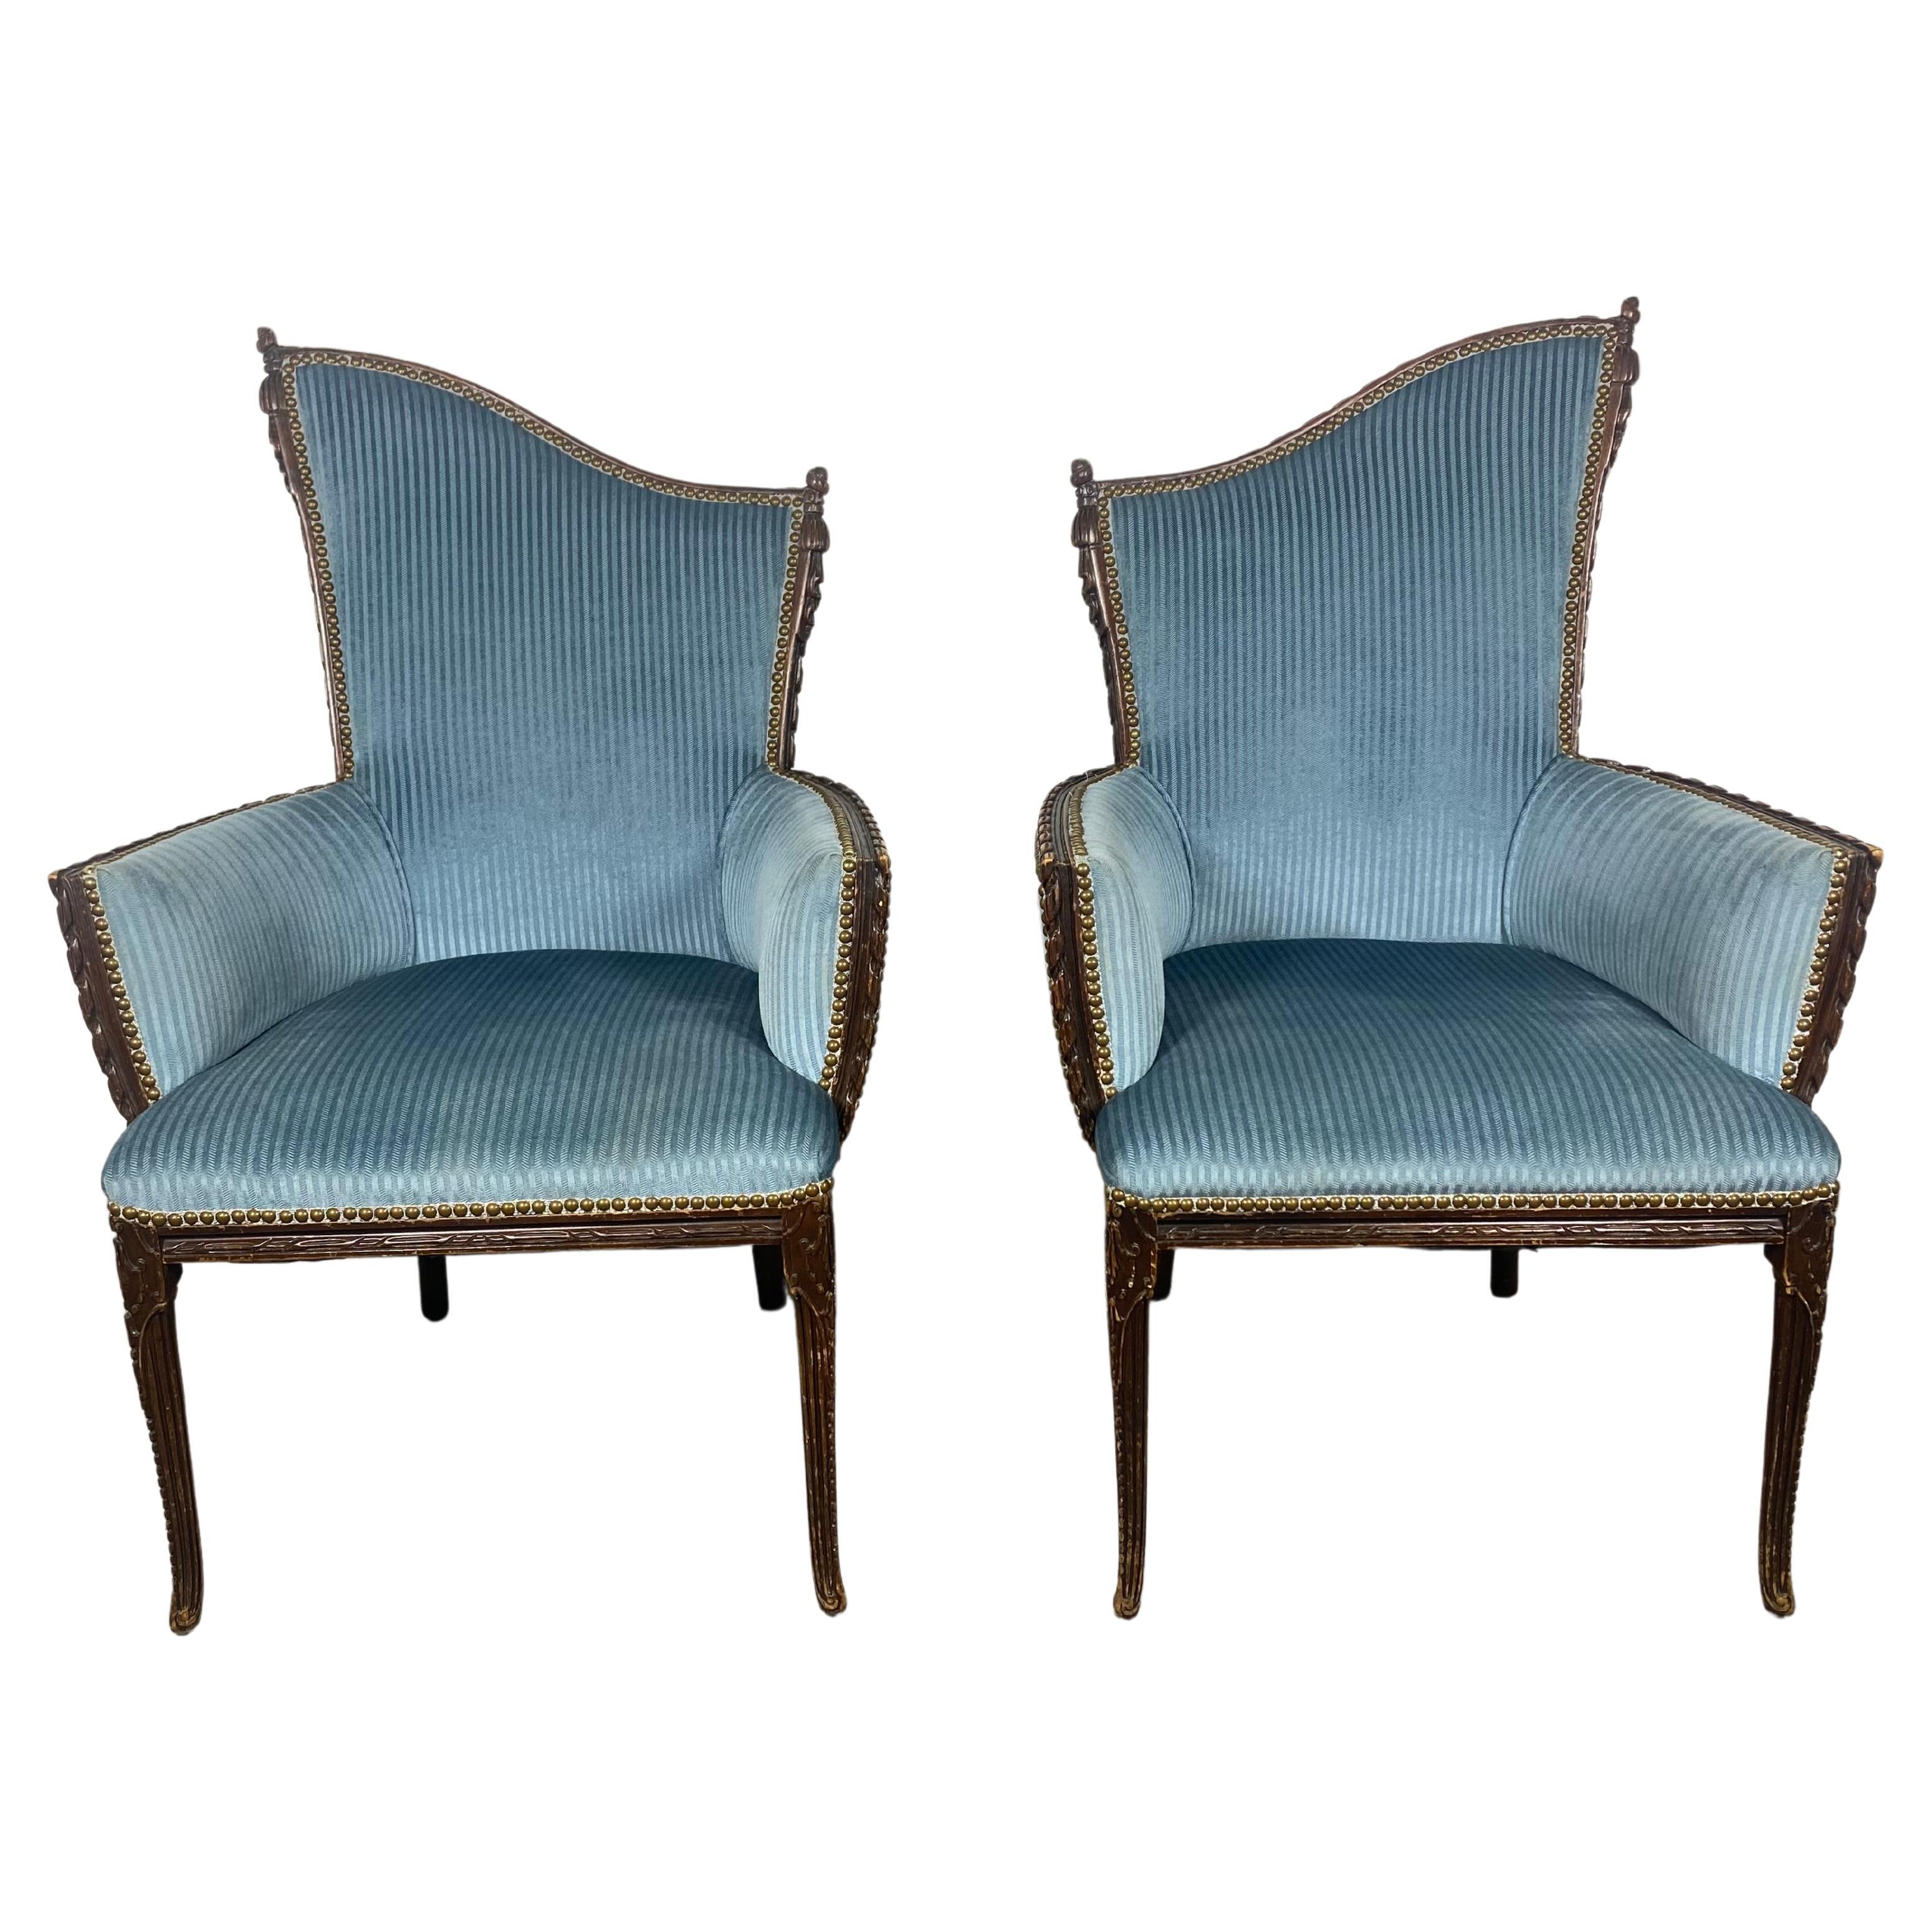 Stunning Pair Asymmetrical Regency Lounge Chairs by Grosfeld House For Sale